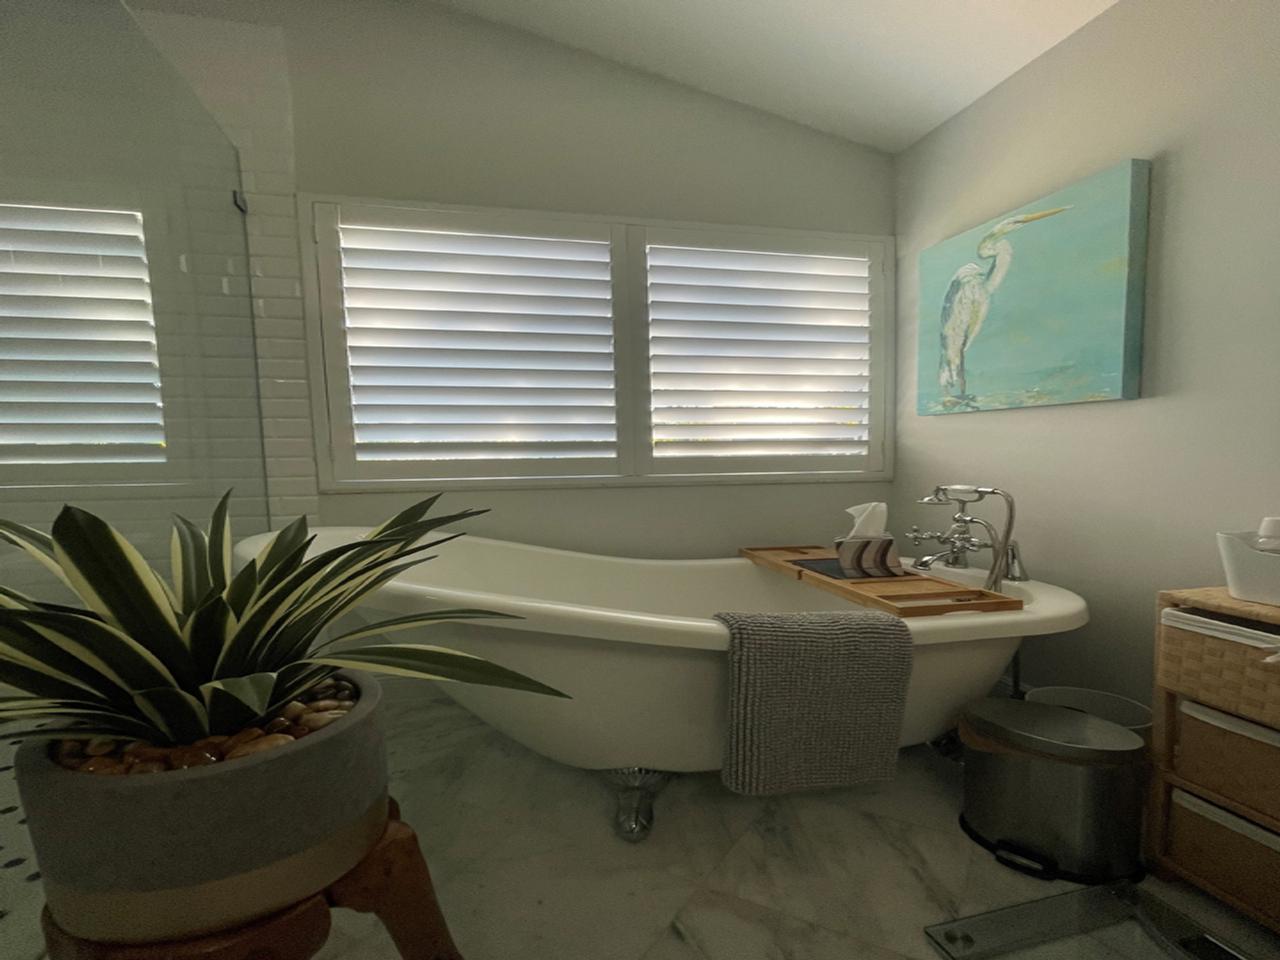 Bathroom with poly shutters